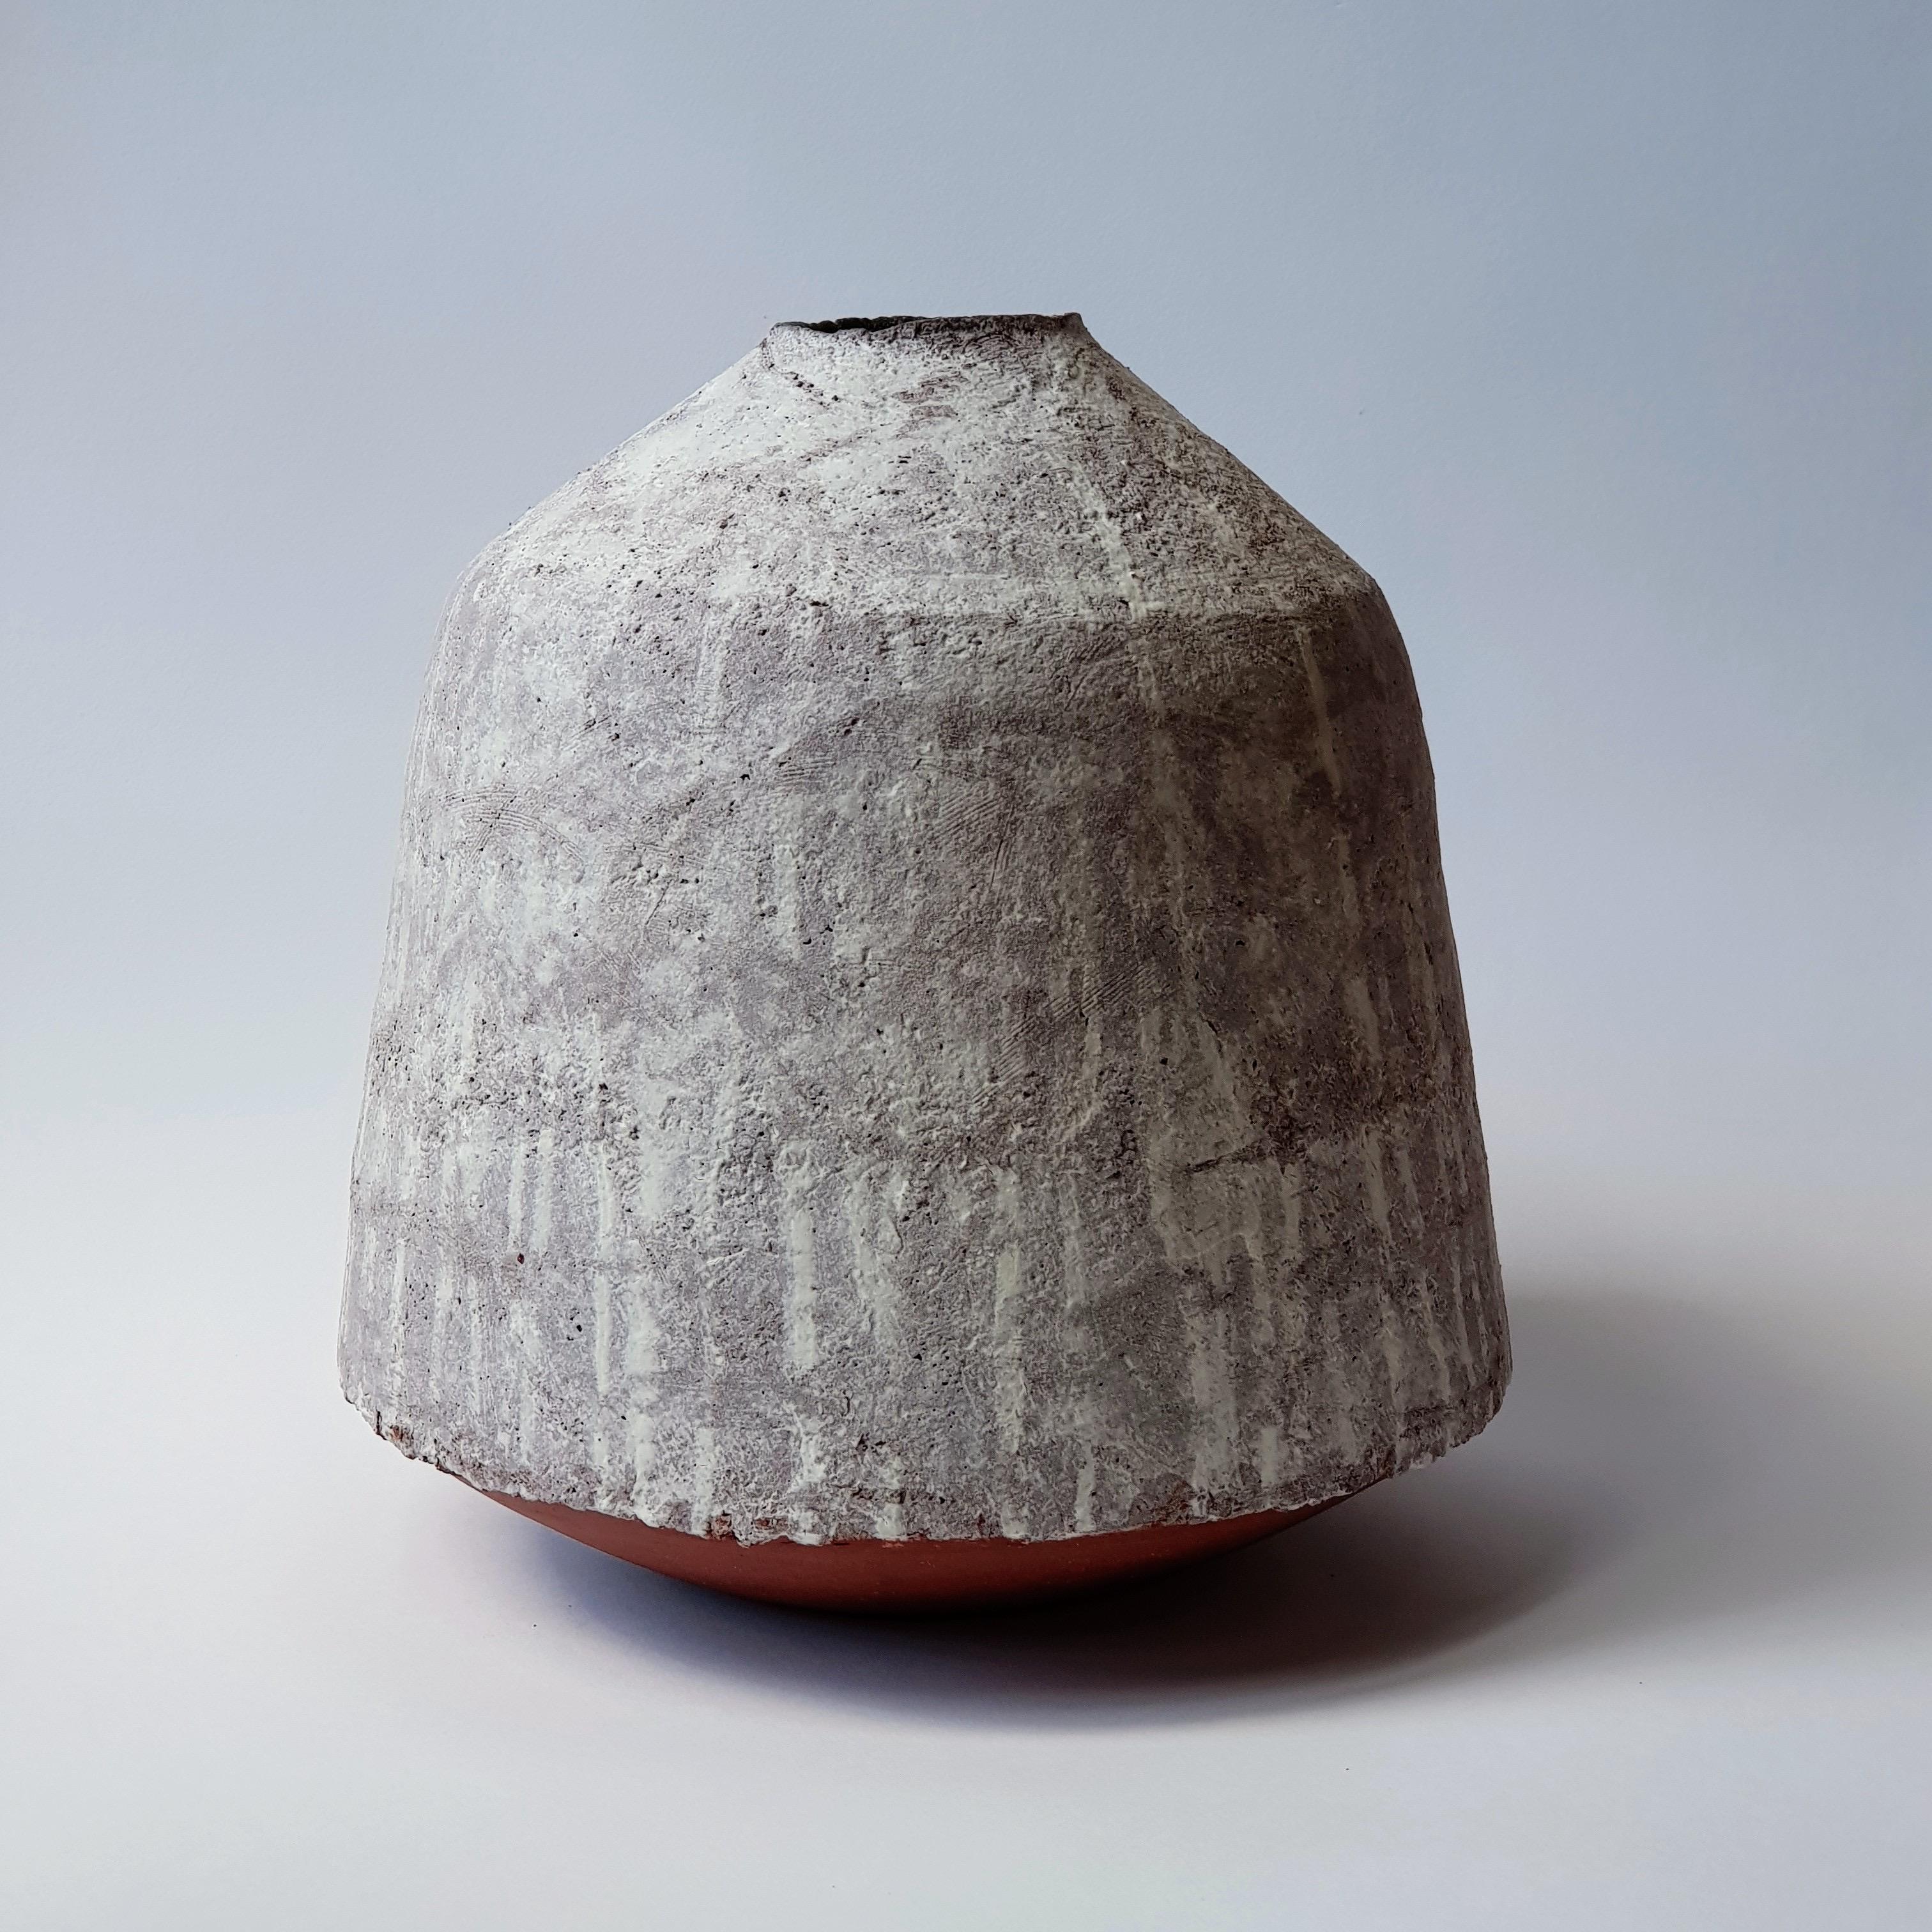 White Patina Stoneware Pithos Vase by Elena Vasilantonaki
Unique
Dimensions: ⌀ 19 x H 24 cm (Dimensions may vary)
Materials: Stoneware
Available finishes: Black, White, Brown, Red, White Patina

Growing up in Greece I was surrounded by pottery forms